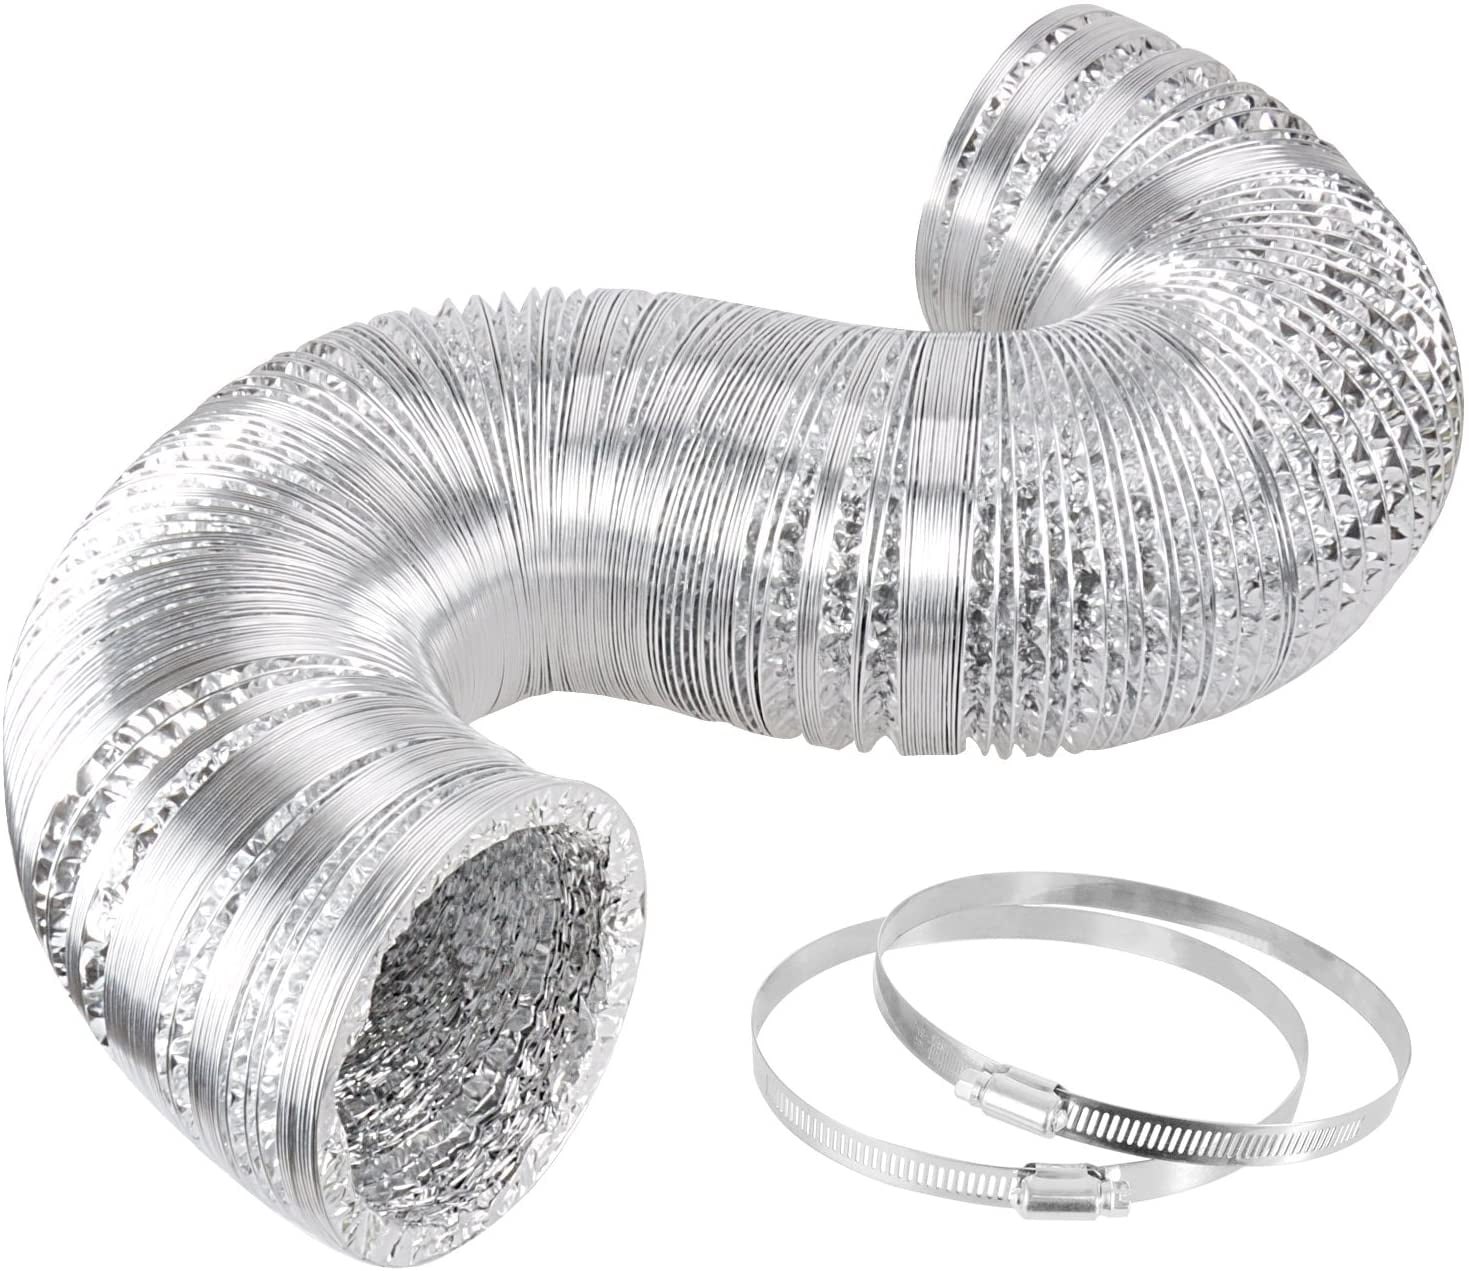 Aluminum Dryer Duct Hose,Flexible Dryer Exhaust Duct Hose 4 in by 10 ft Includes 2 Metal Clamps By TOMOON 